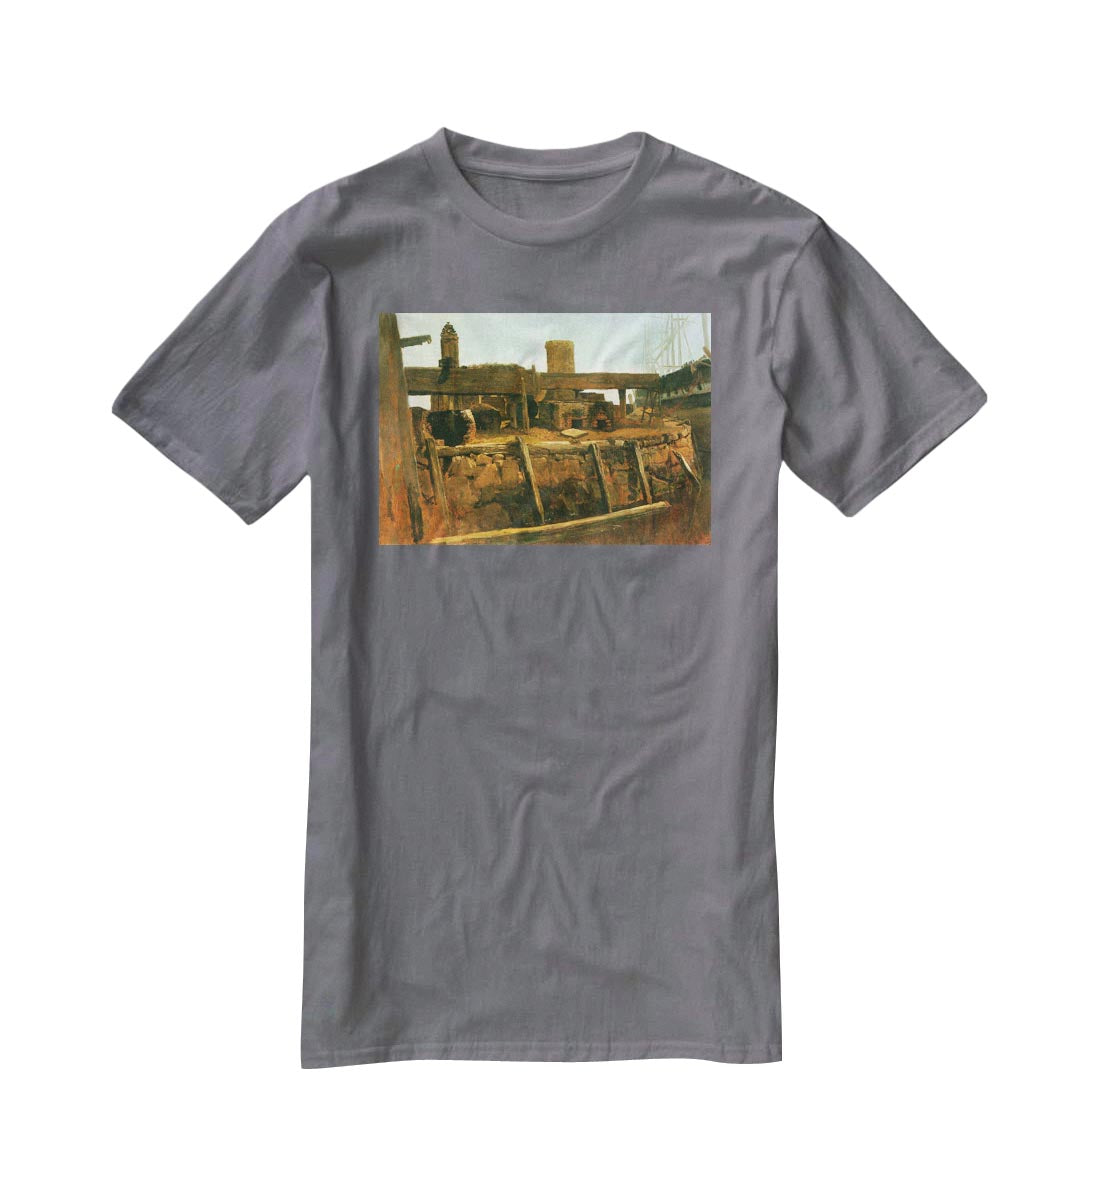 Boat at the dock by Bierstadt T-Shirt - Canvas Art Rocks - 3